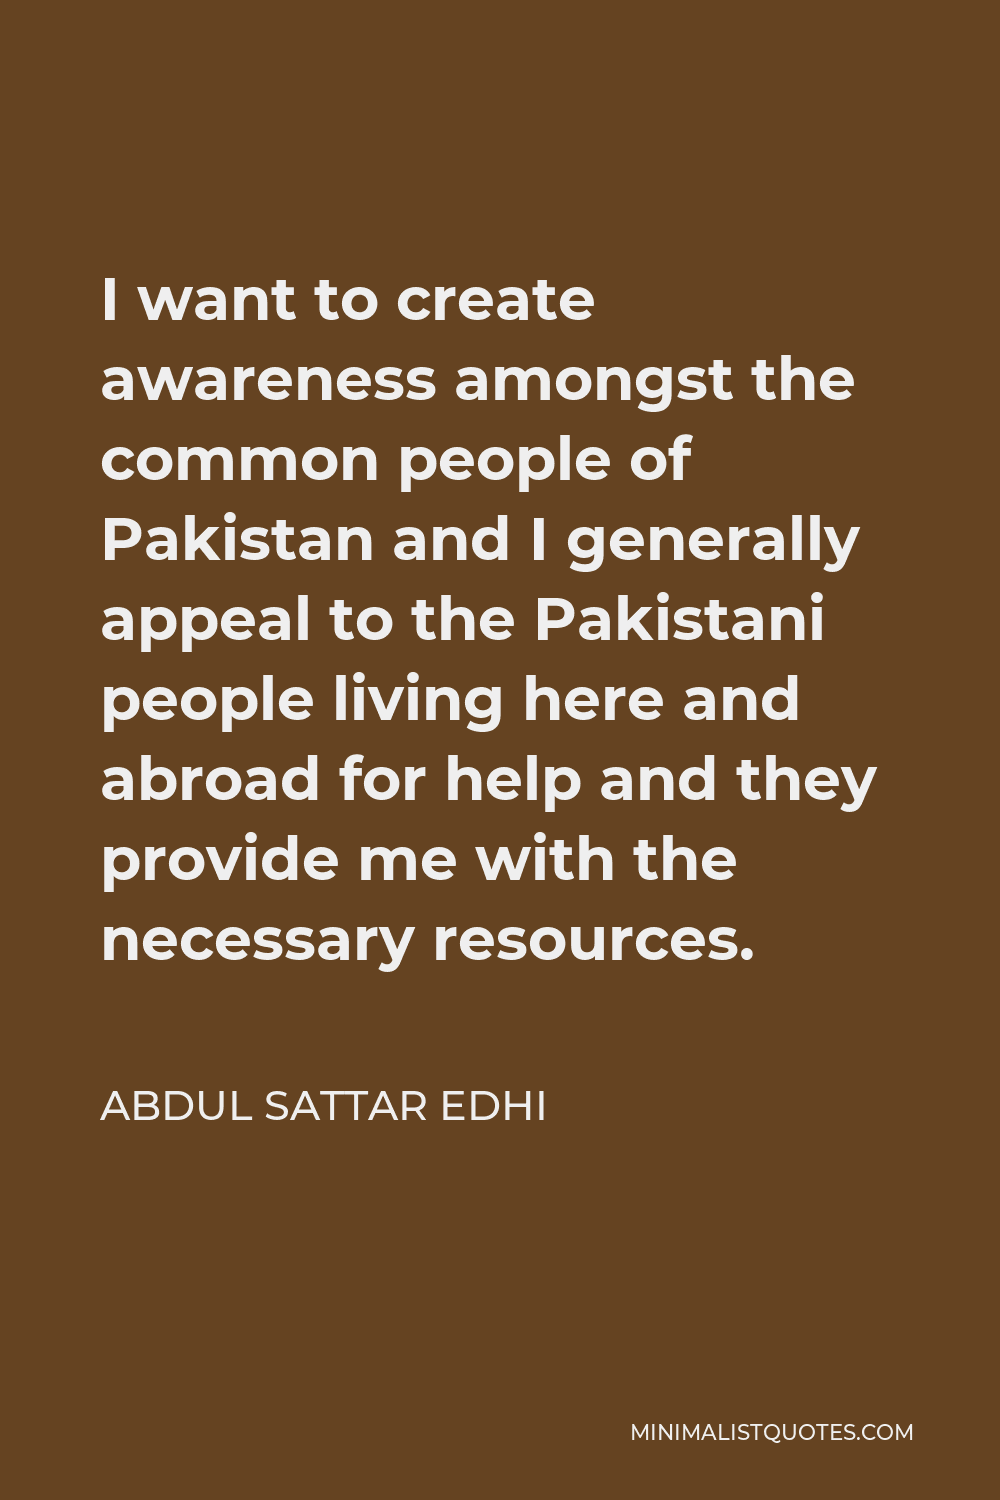 Abdul Sattar Edhi Quote - I want to create awareness amongst the common people of Pakistan and I generally appeal to the Pakistani people living here and abroad for help and they provide me with the necessary resources.